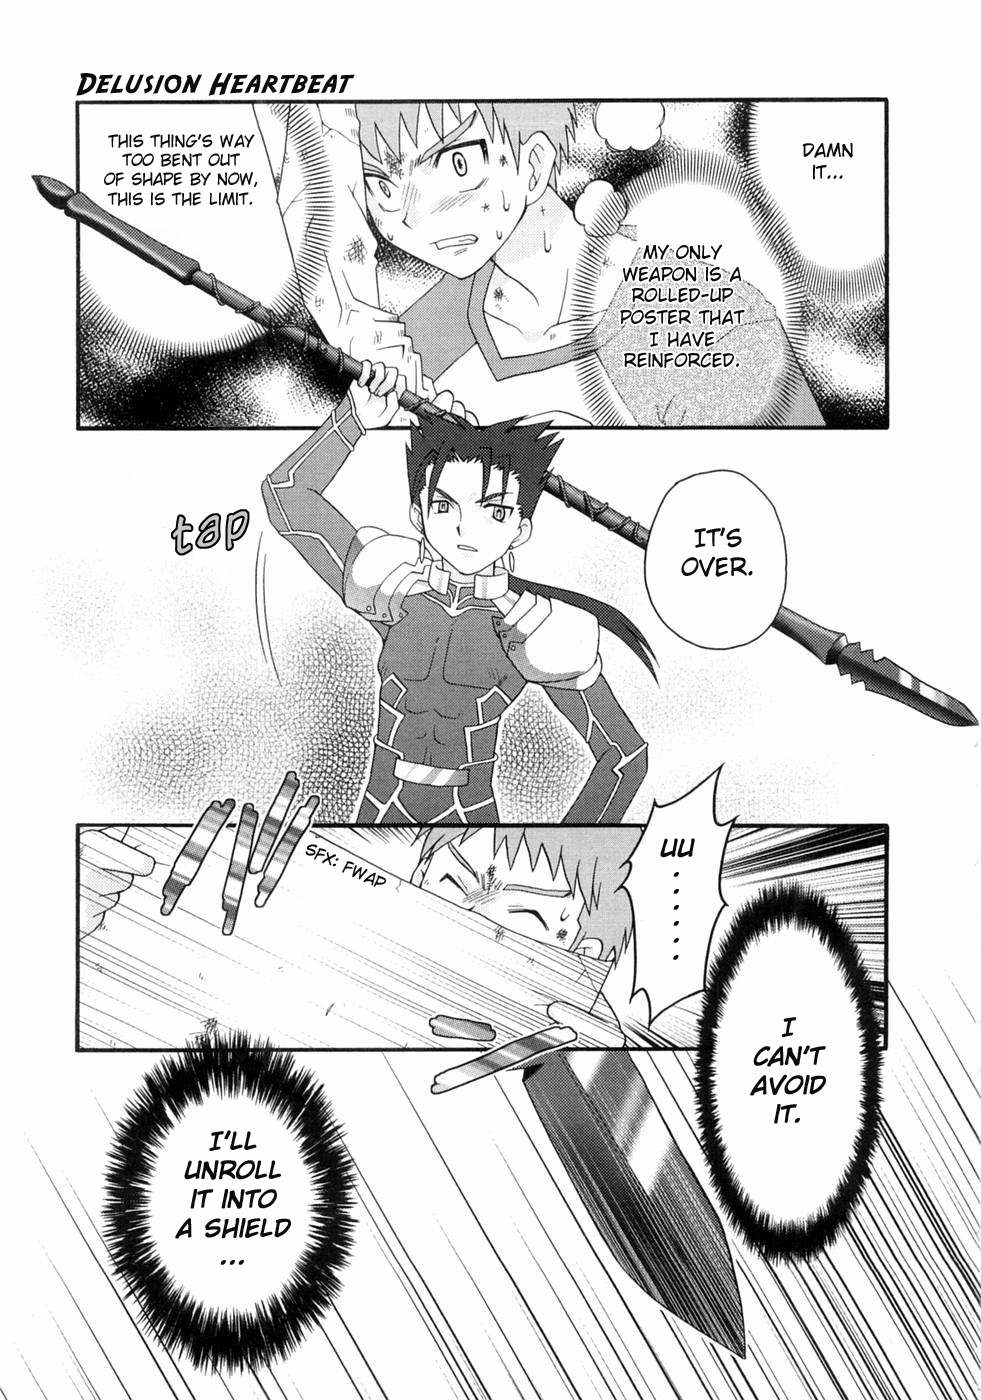 Fate/stay night Comic Battle Vol. 1 Ch. 7 Shirou vs Gay Witch Hunt (Delusion Heartbeat)